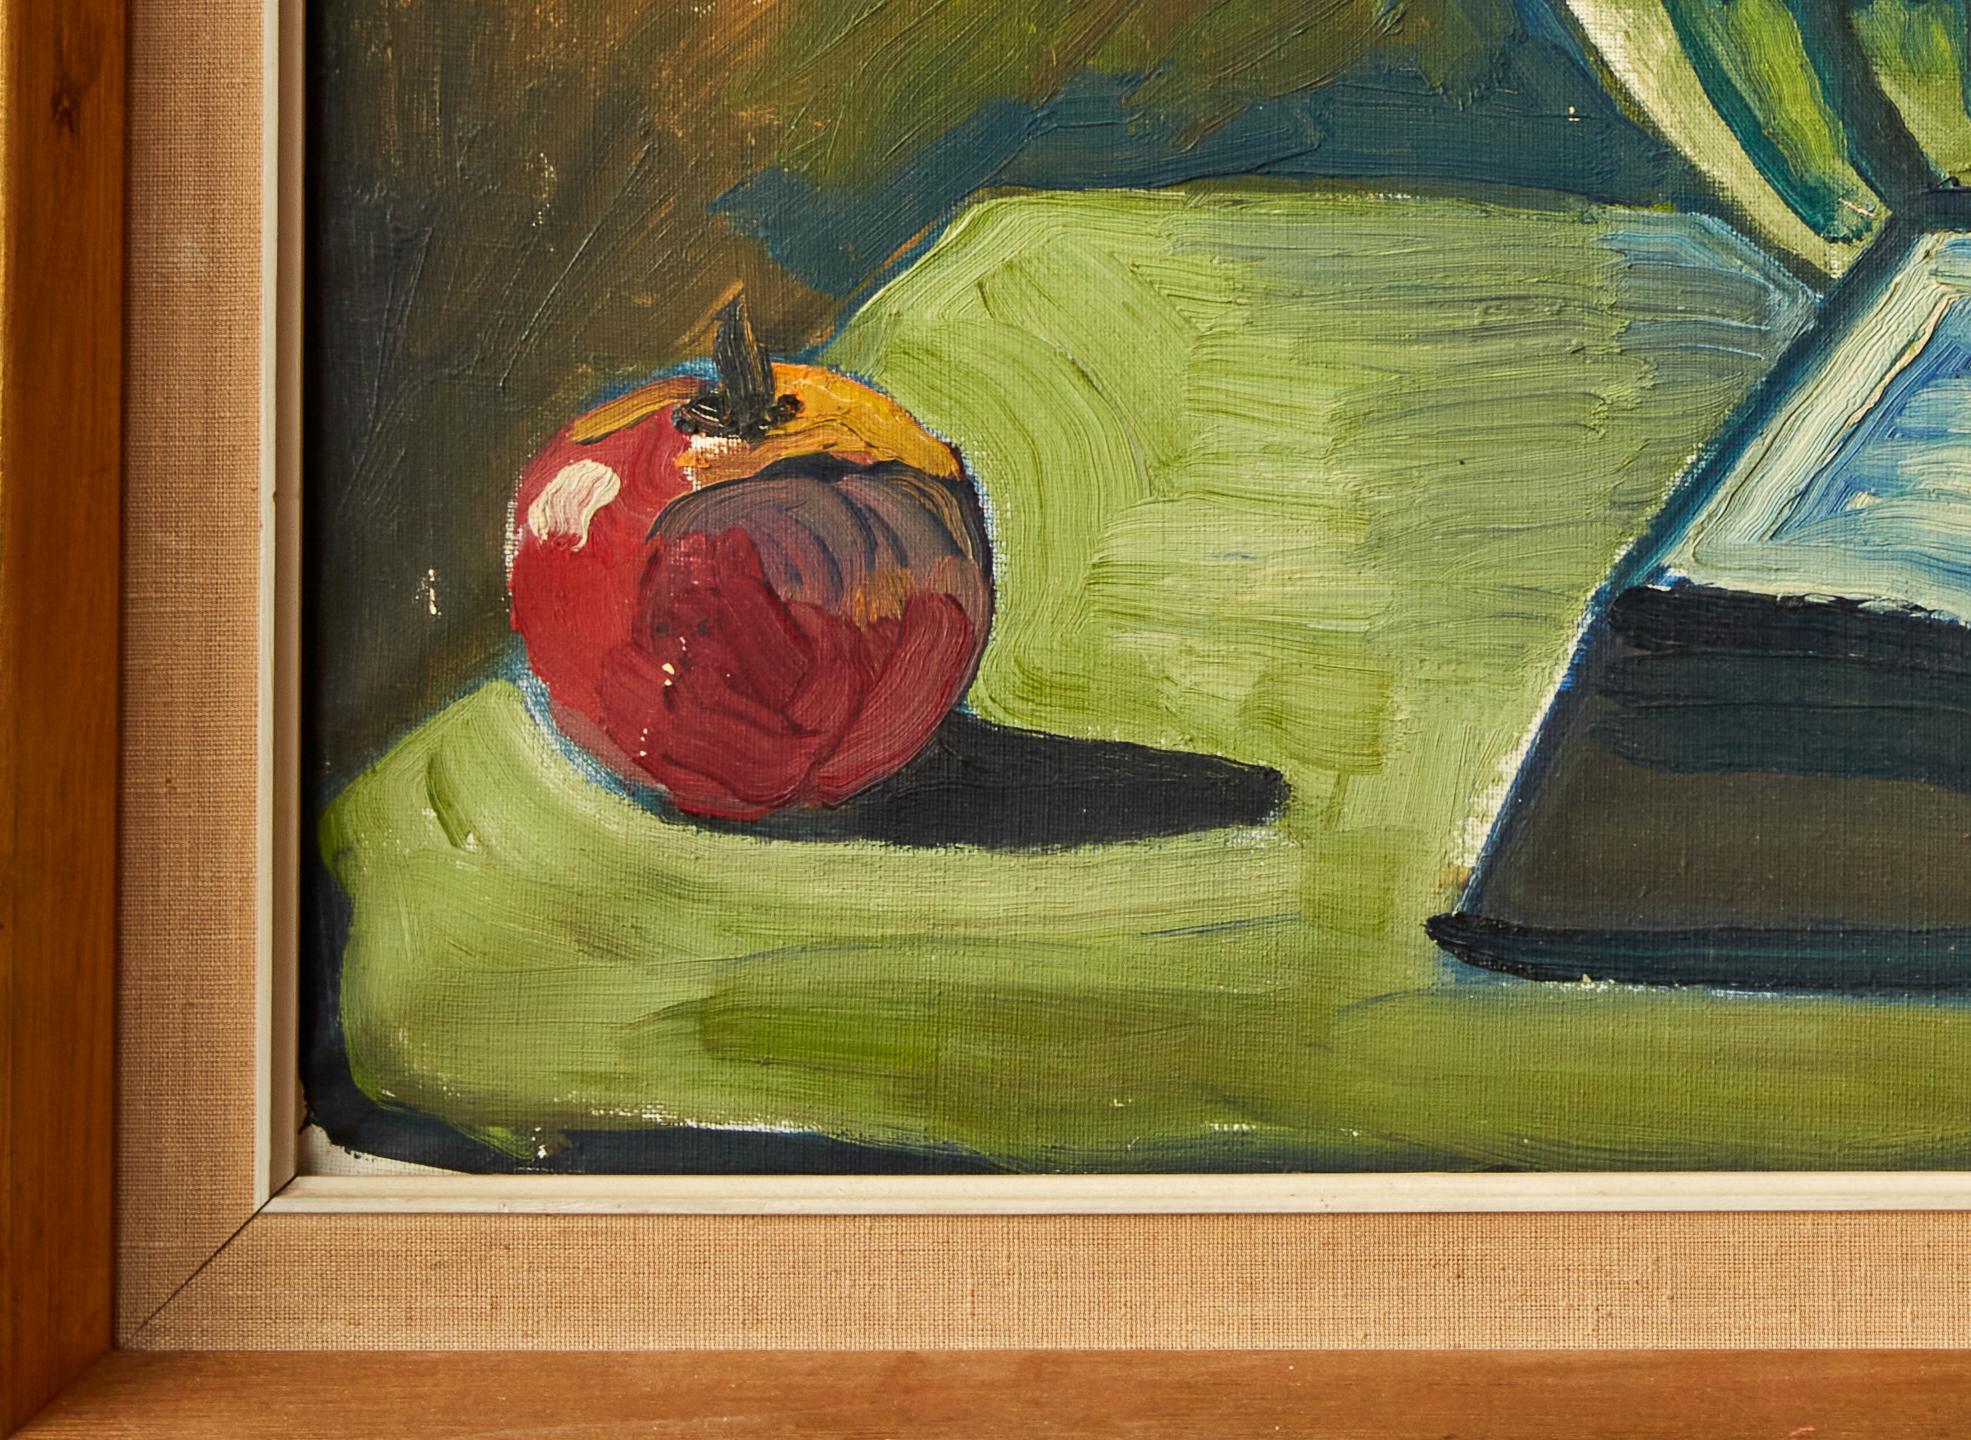 Flowers, Fruit and Book Still life by Eyvind Oleson 1967 Still Life Painting 5